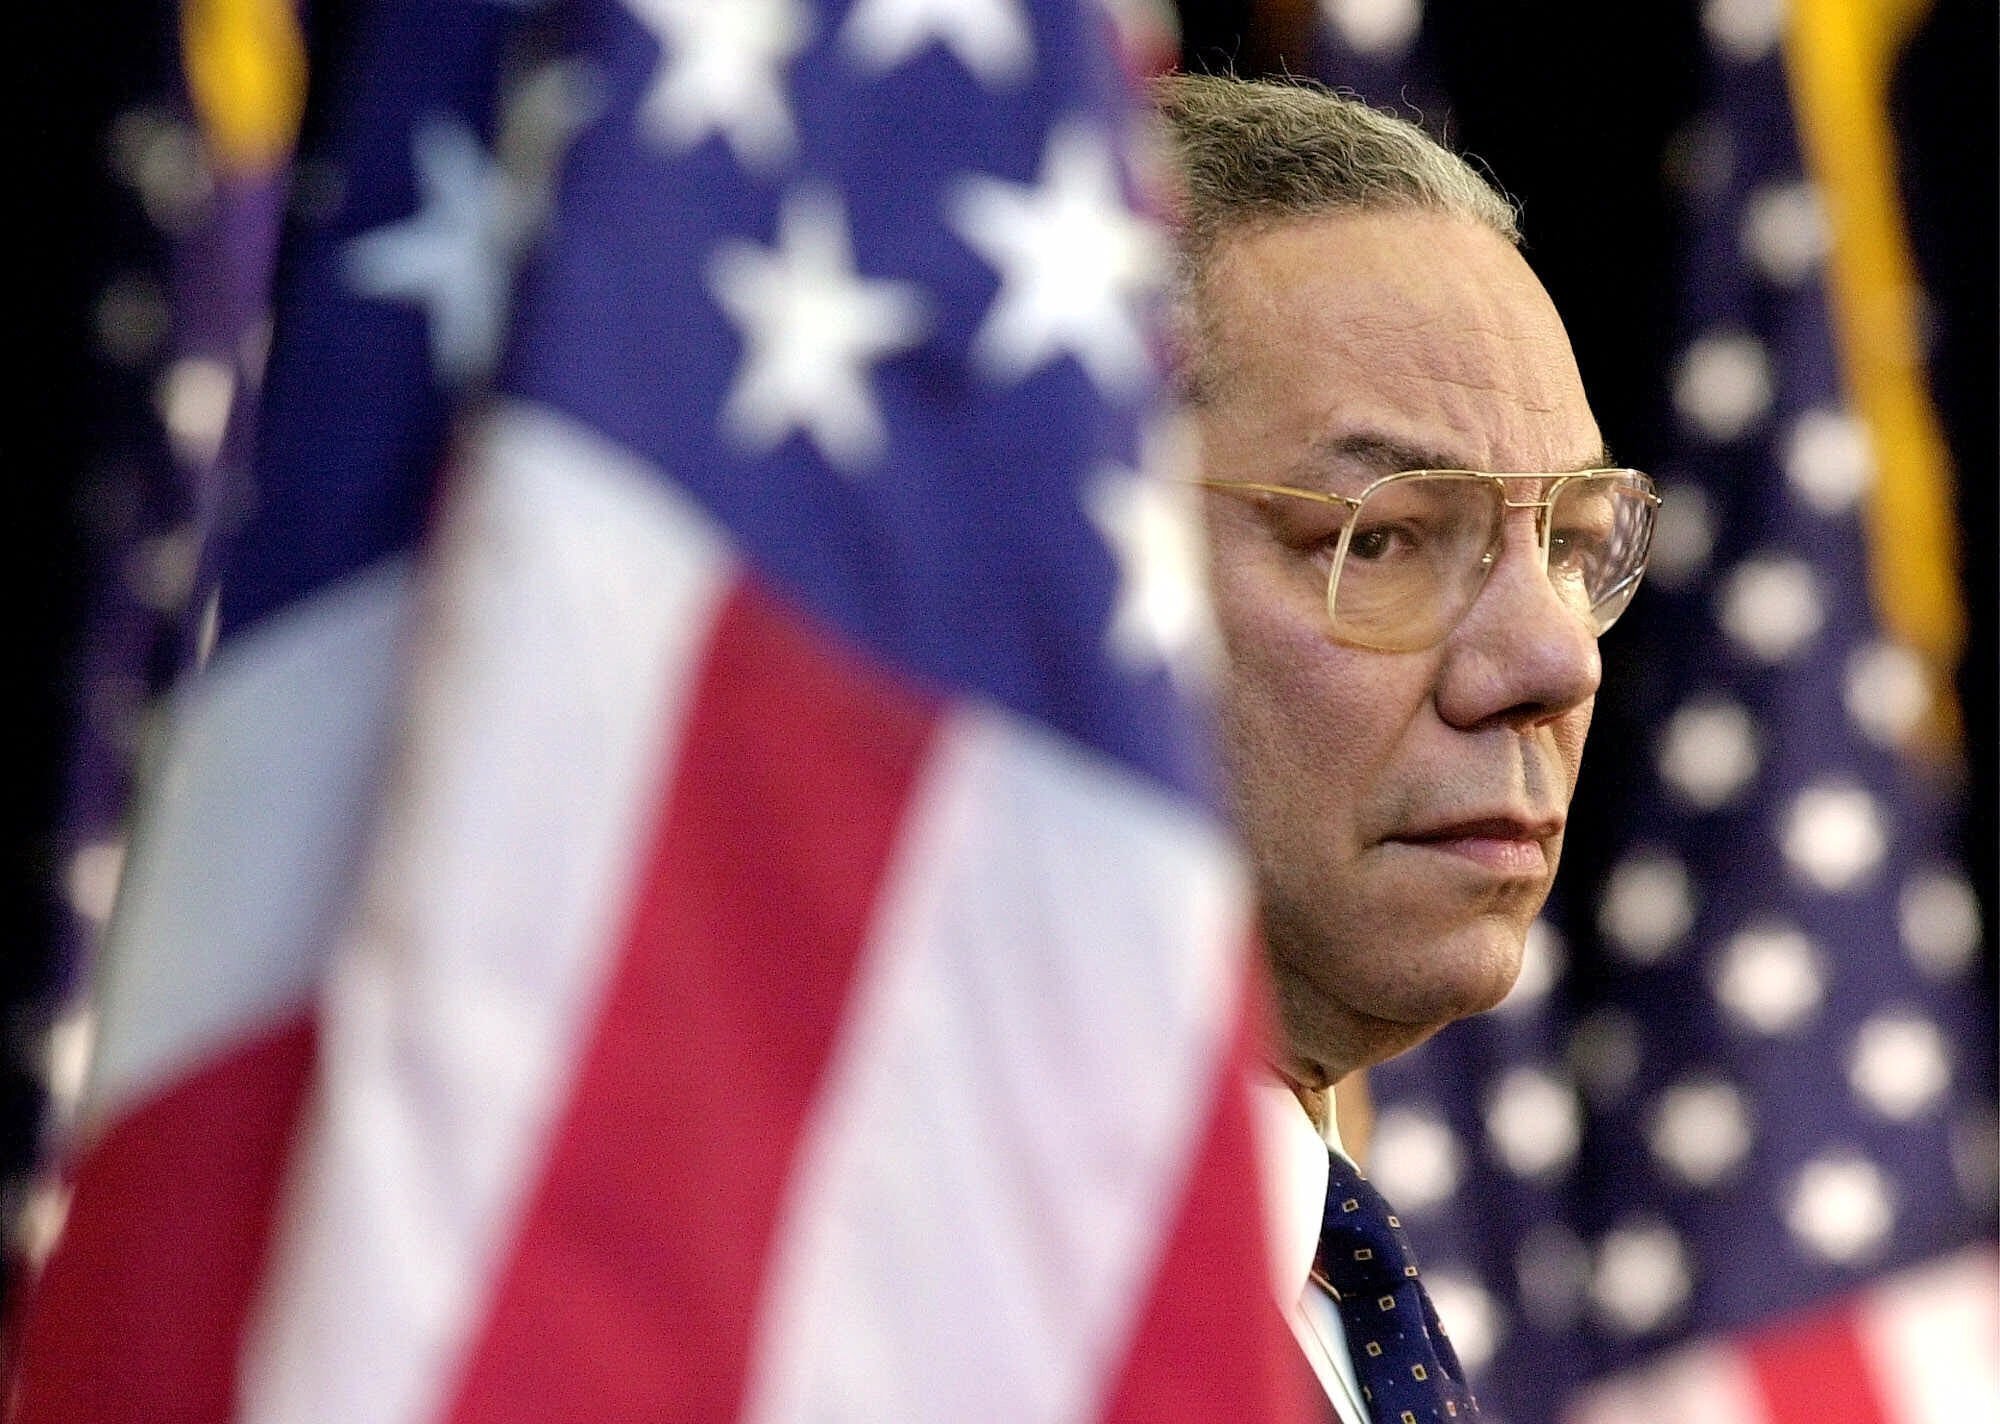 FILE - In this Feb. 15, 2001 file photo, Secretary of State Colin Powell looks on as President Bush addresses State Department employees at the State Department in Washington. Powell, former Joint Chiefs chairman and secretary of state, has died from COVID-19 complications, his family said Monday, Oct. 18, 2021. (AP Photo/Kenneth Lambert)